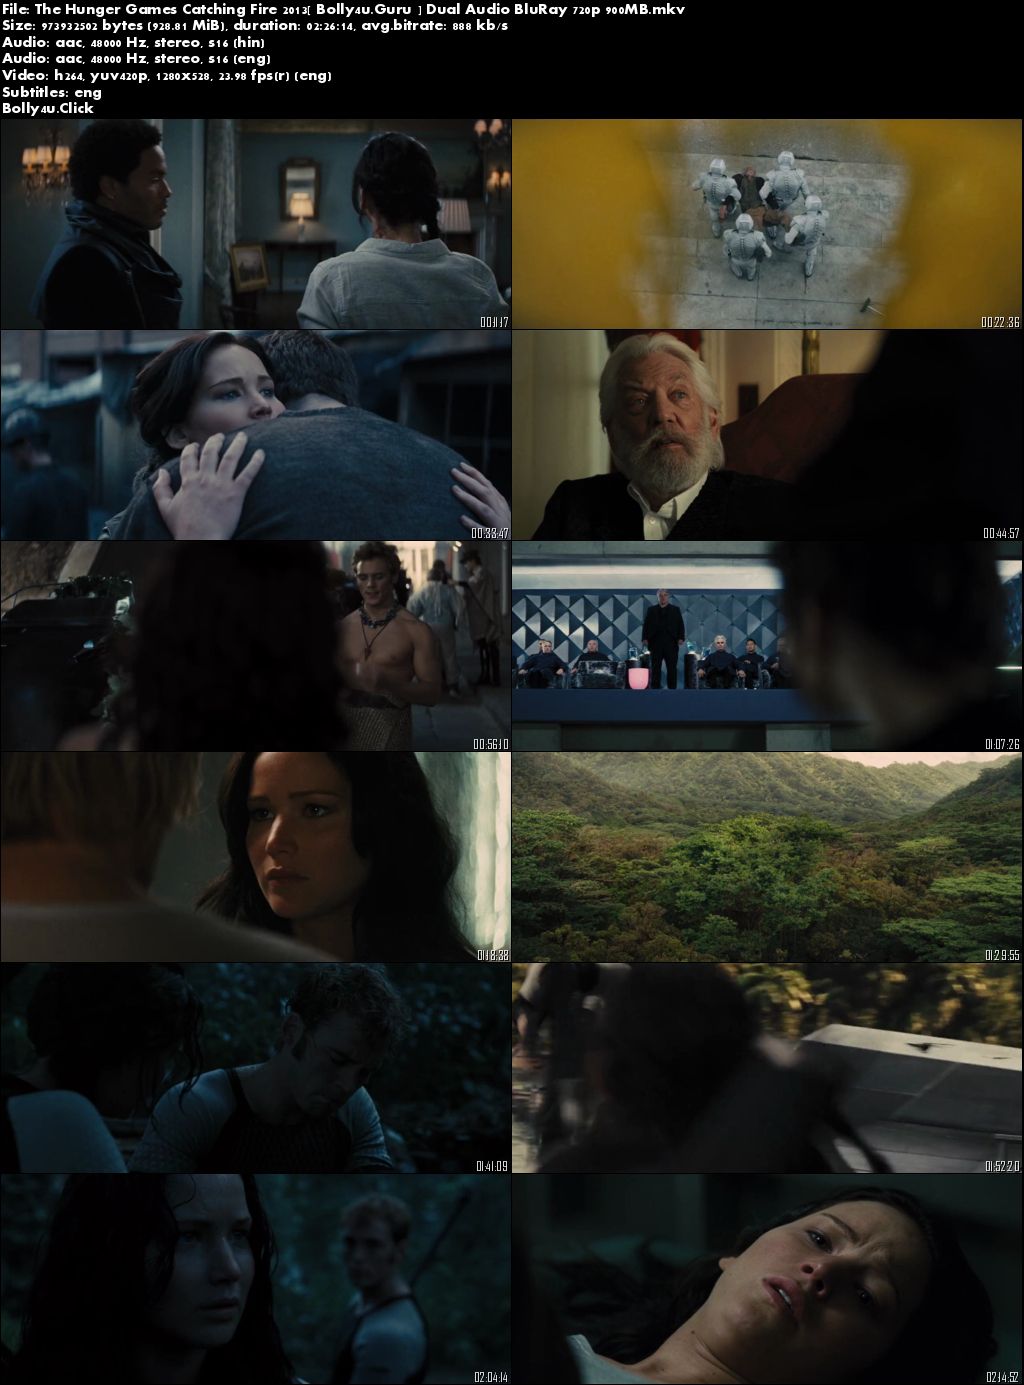 The Hunger Games Catching Fire 2013 BRRip 900Mb Hindi Dual Audio 720p Download